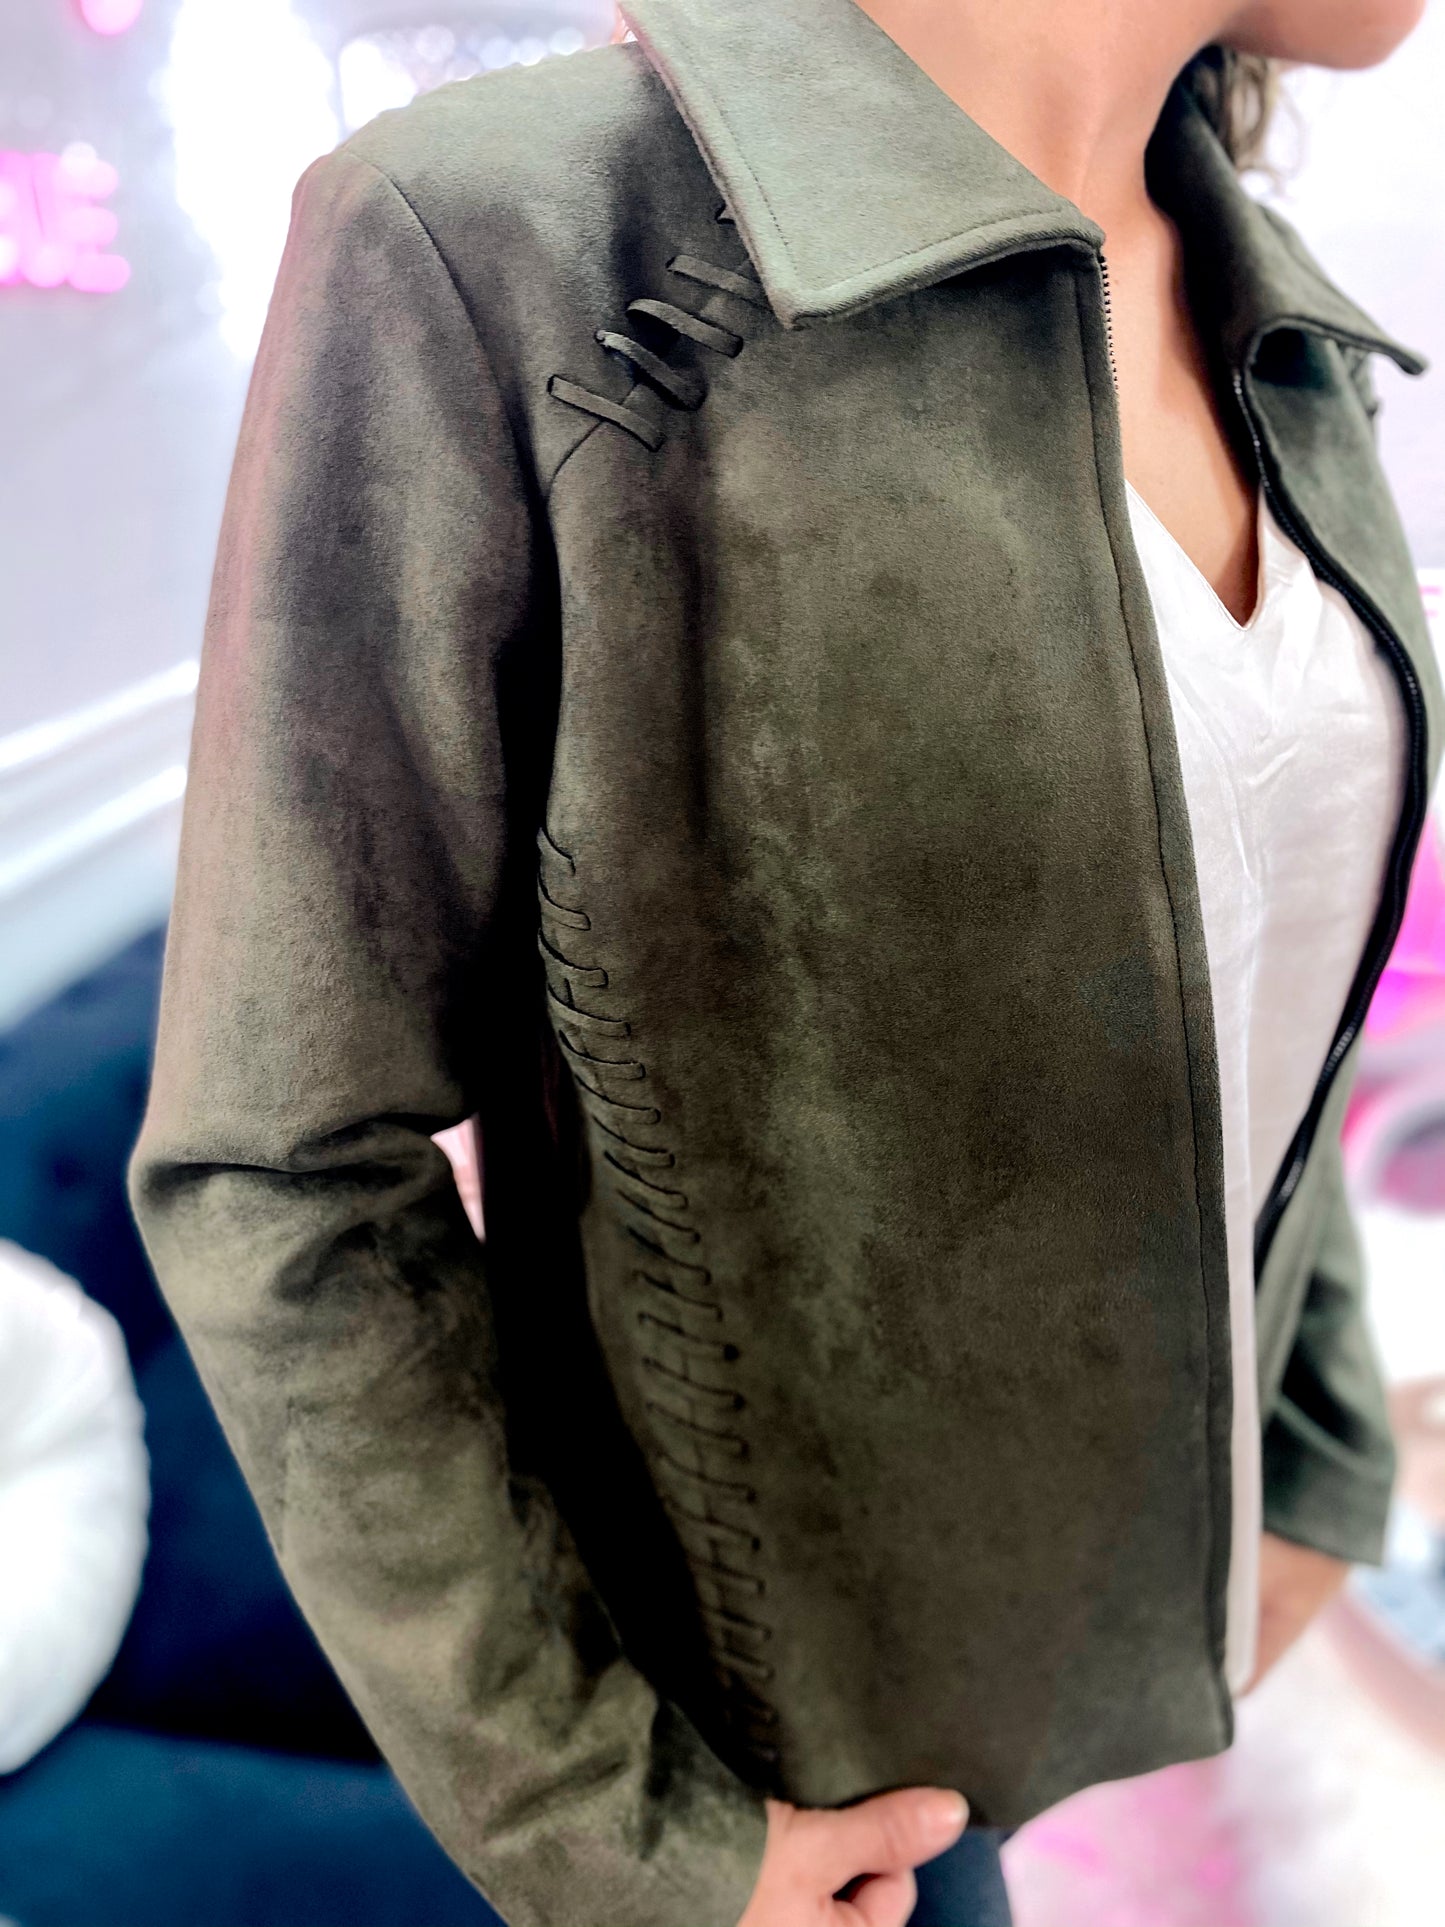 LUXE: SUEDE OLIVE JACKET